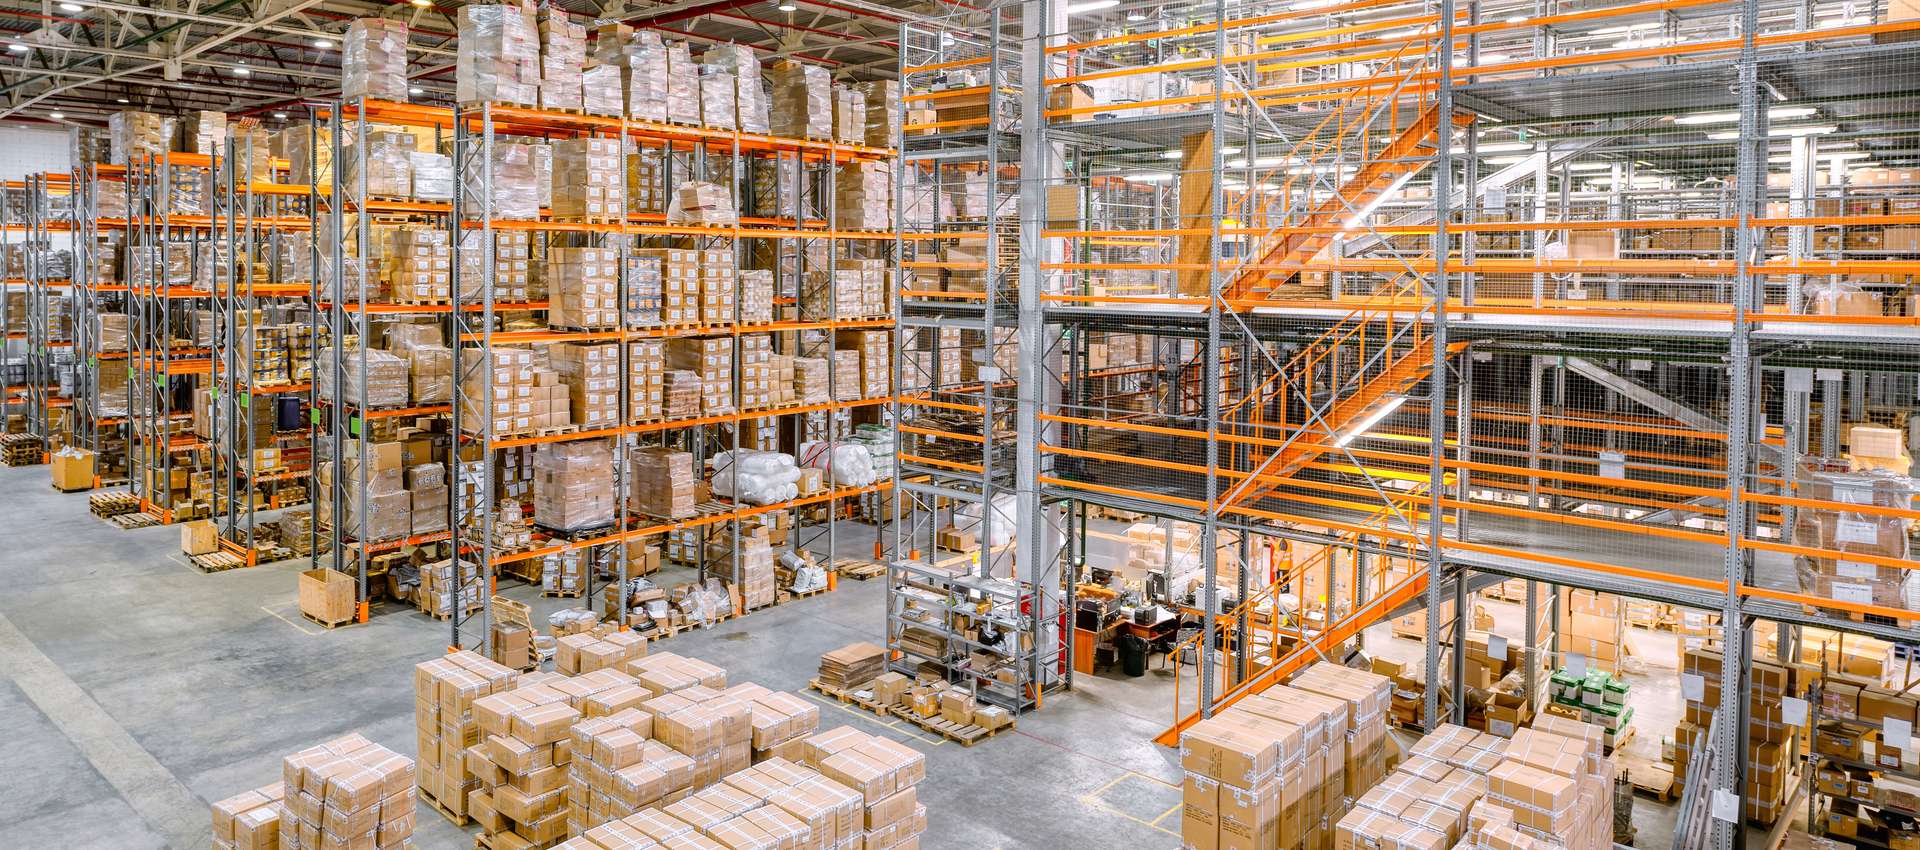 Key Factors to Consider When Designing Your Warehouse Layout